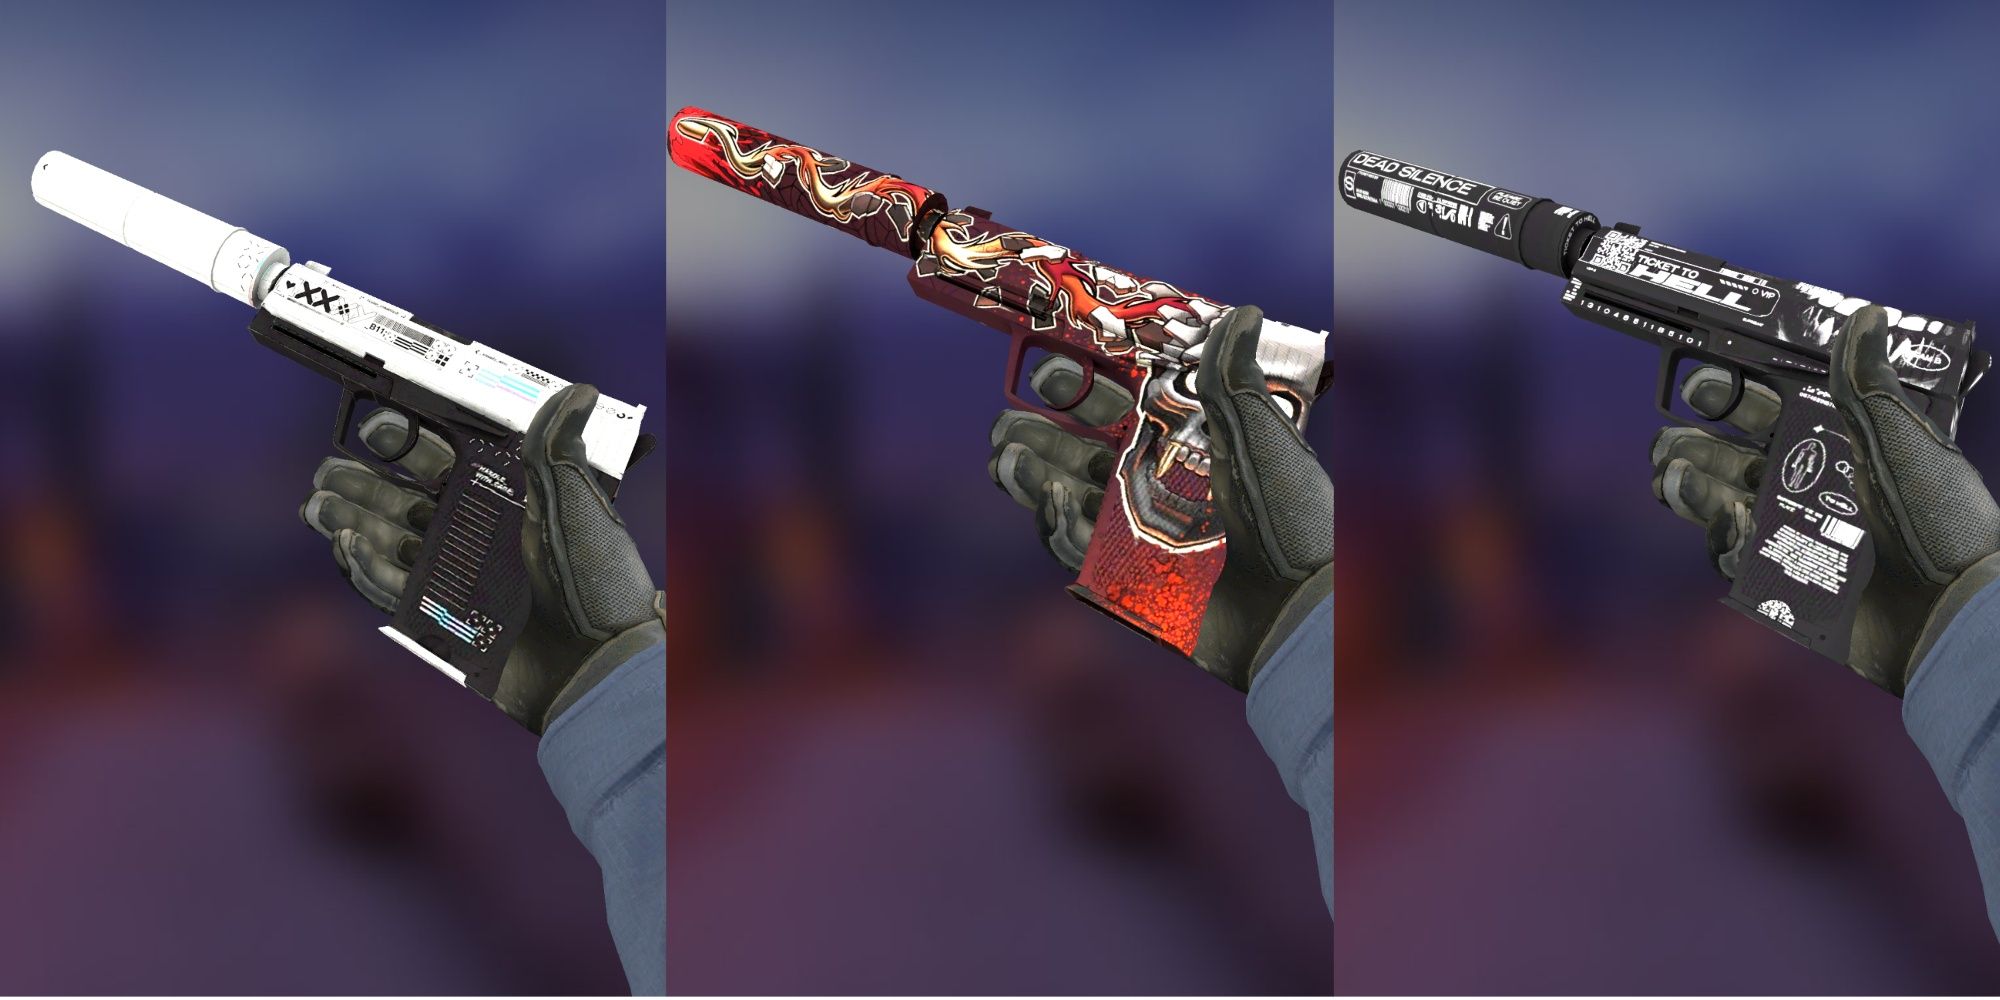 instal the last version for android USP-S Flashback cs go skin